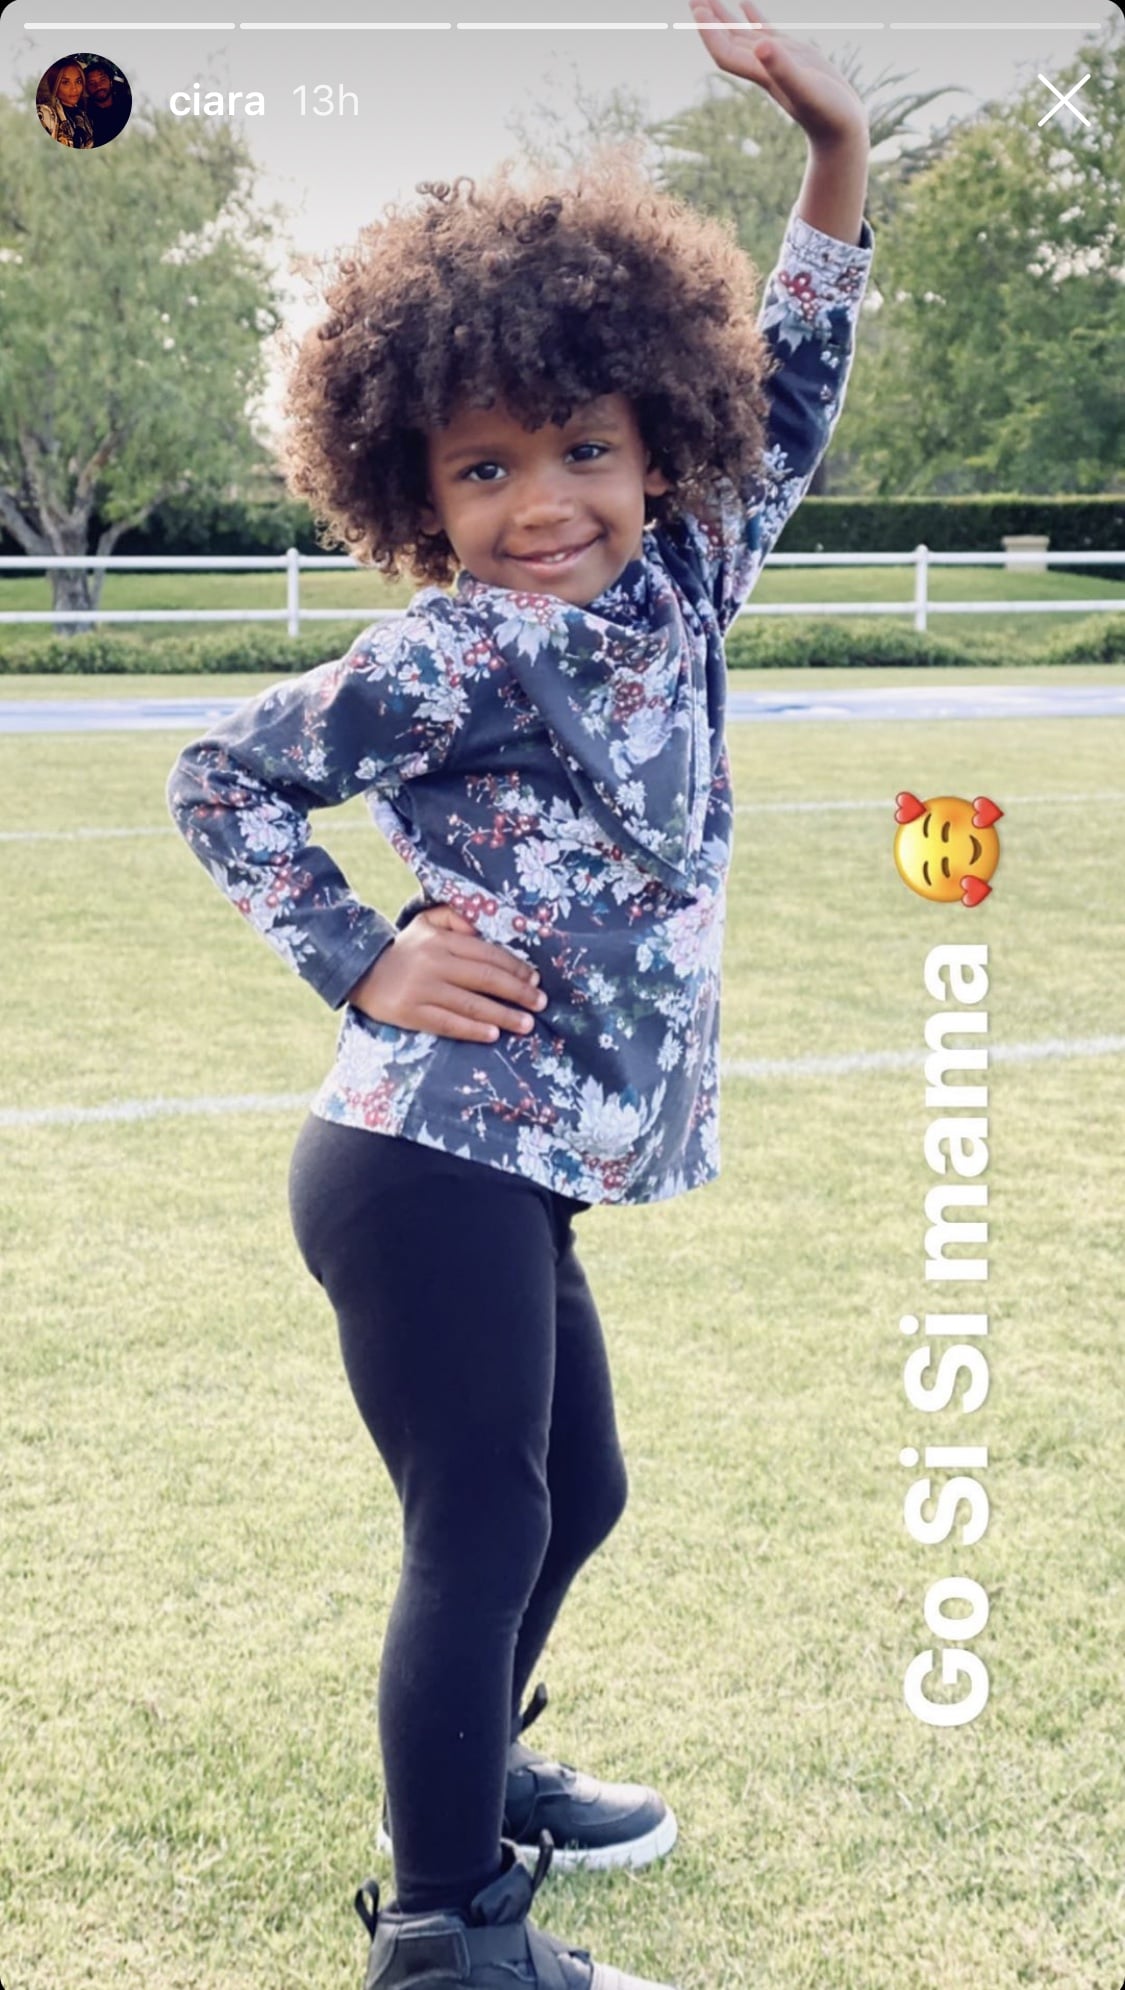 Ciara and Russell Wilson Celebrate Son Future on His 9th Birthday: 'You Are  a Leader', News